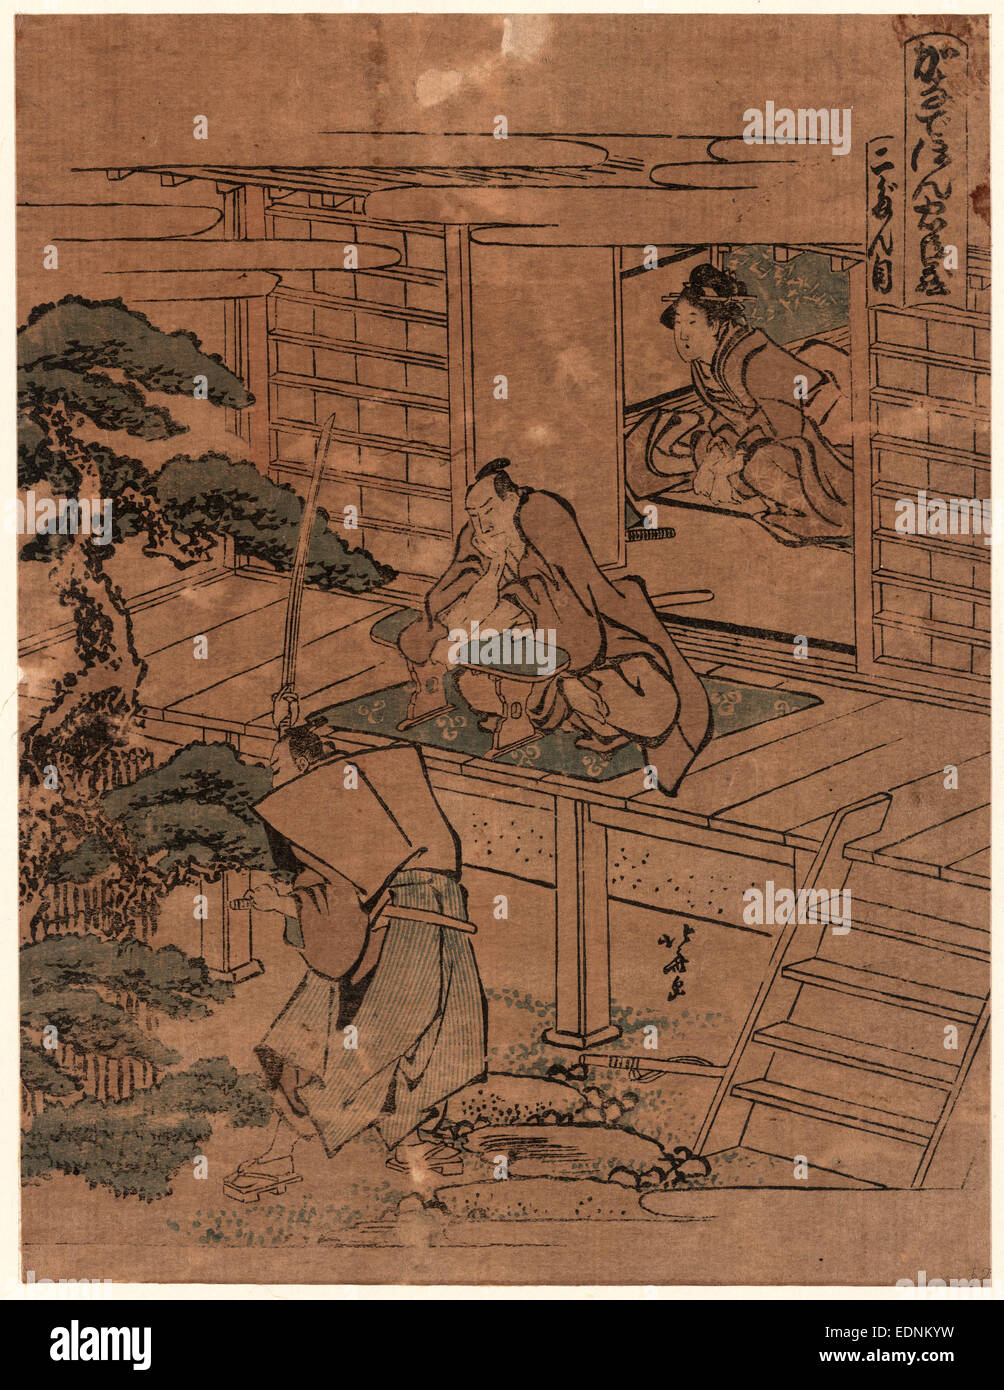 Nidanme, Act two [of the Kanadehon Chushingura]., Katsushika, Hokusai, 1760-1849, artist, [between 1804 and 1812], 1 print : woodcut, color ; 22 x 16.9 cm., Print shows, in the background, Konami sitting inside a building, probably meeting with her lover Rikiya, who is not visible, though the hilt of a sword can be seen through the opening, at center is Wakasanosuke sitting on a porch, and, in the foreground, Honzo, a samurai and Wakasanosuke's retainer, cutting a pine branch from a small tree in front of the porch, demonstrating his loyalty. A scene from act two of the play Chushingura or rev Stock Photo